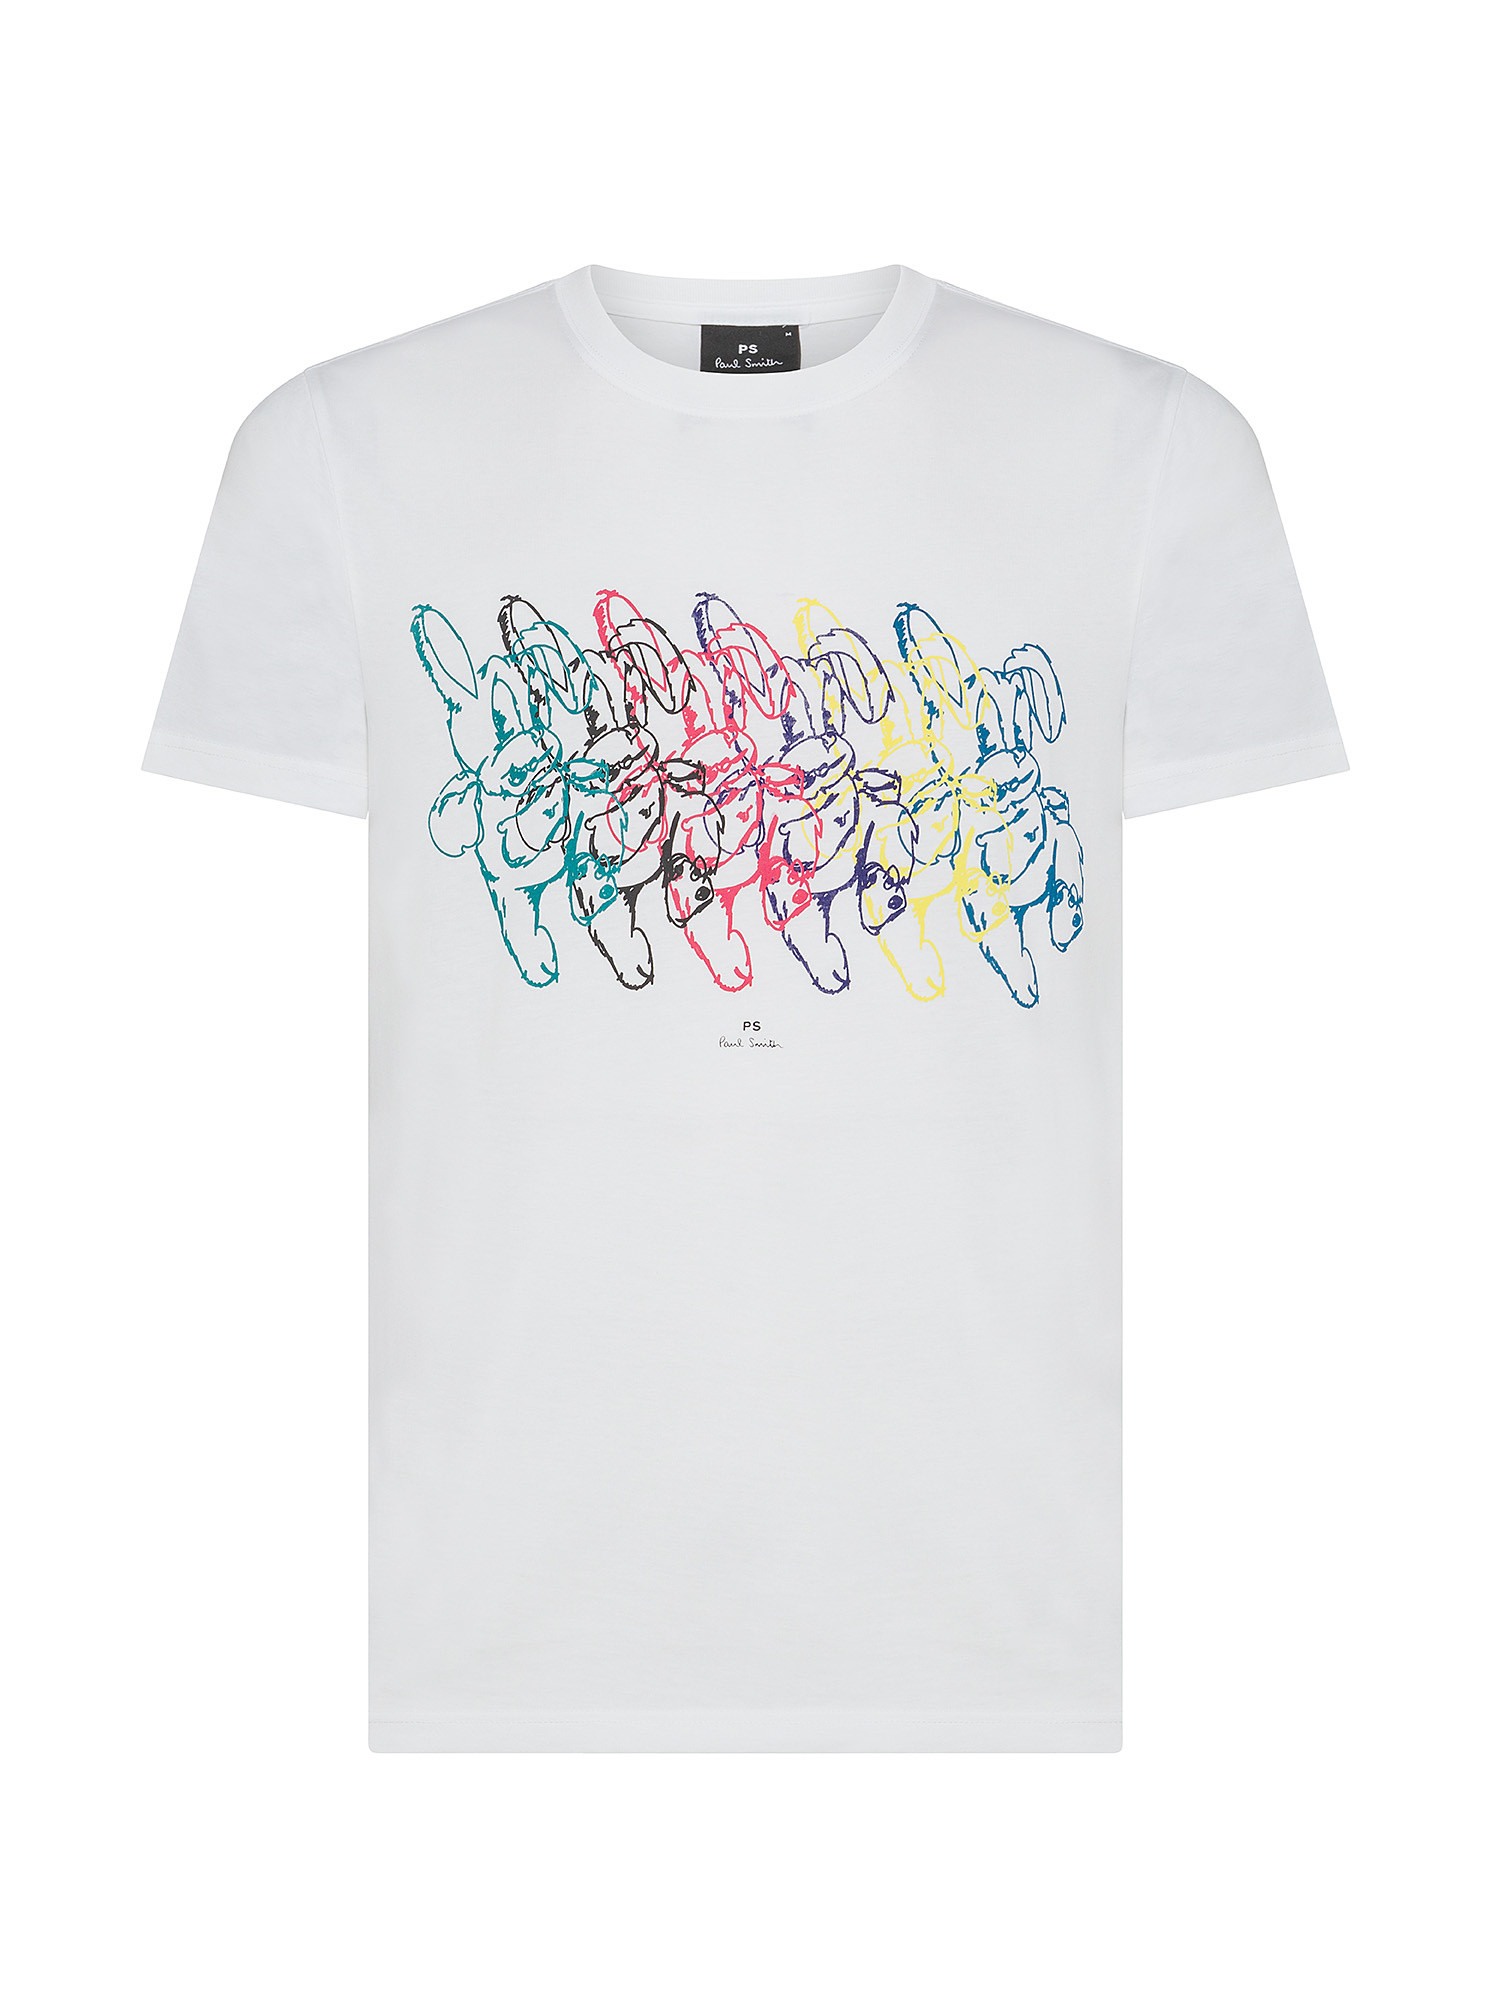 Paul Smith - Slim fit cotton T-shirt with rabbit print, White, large image number 0